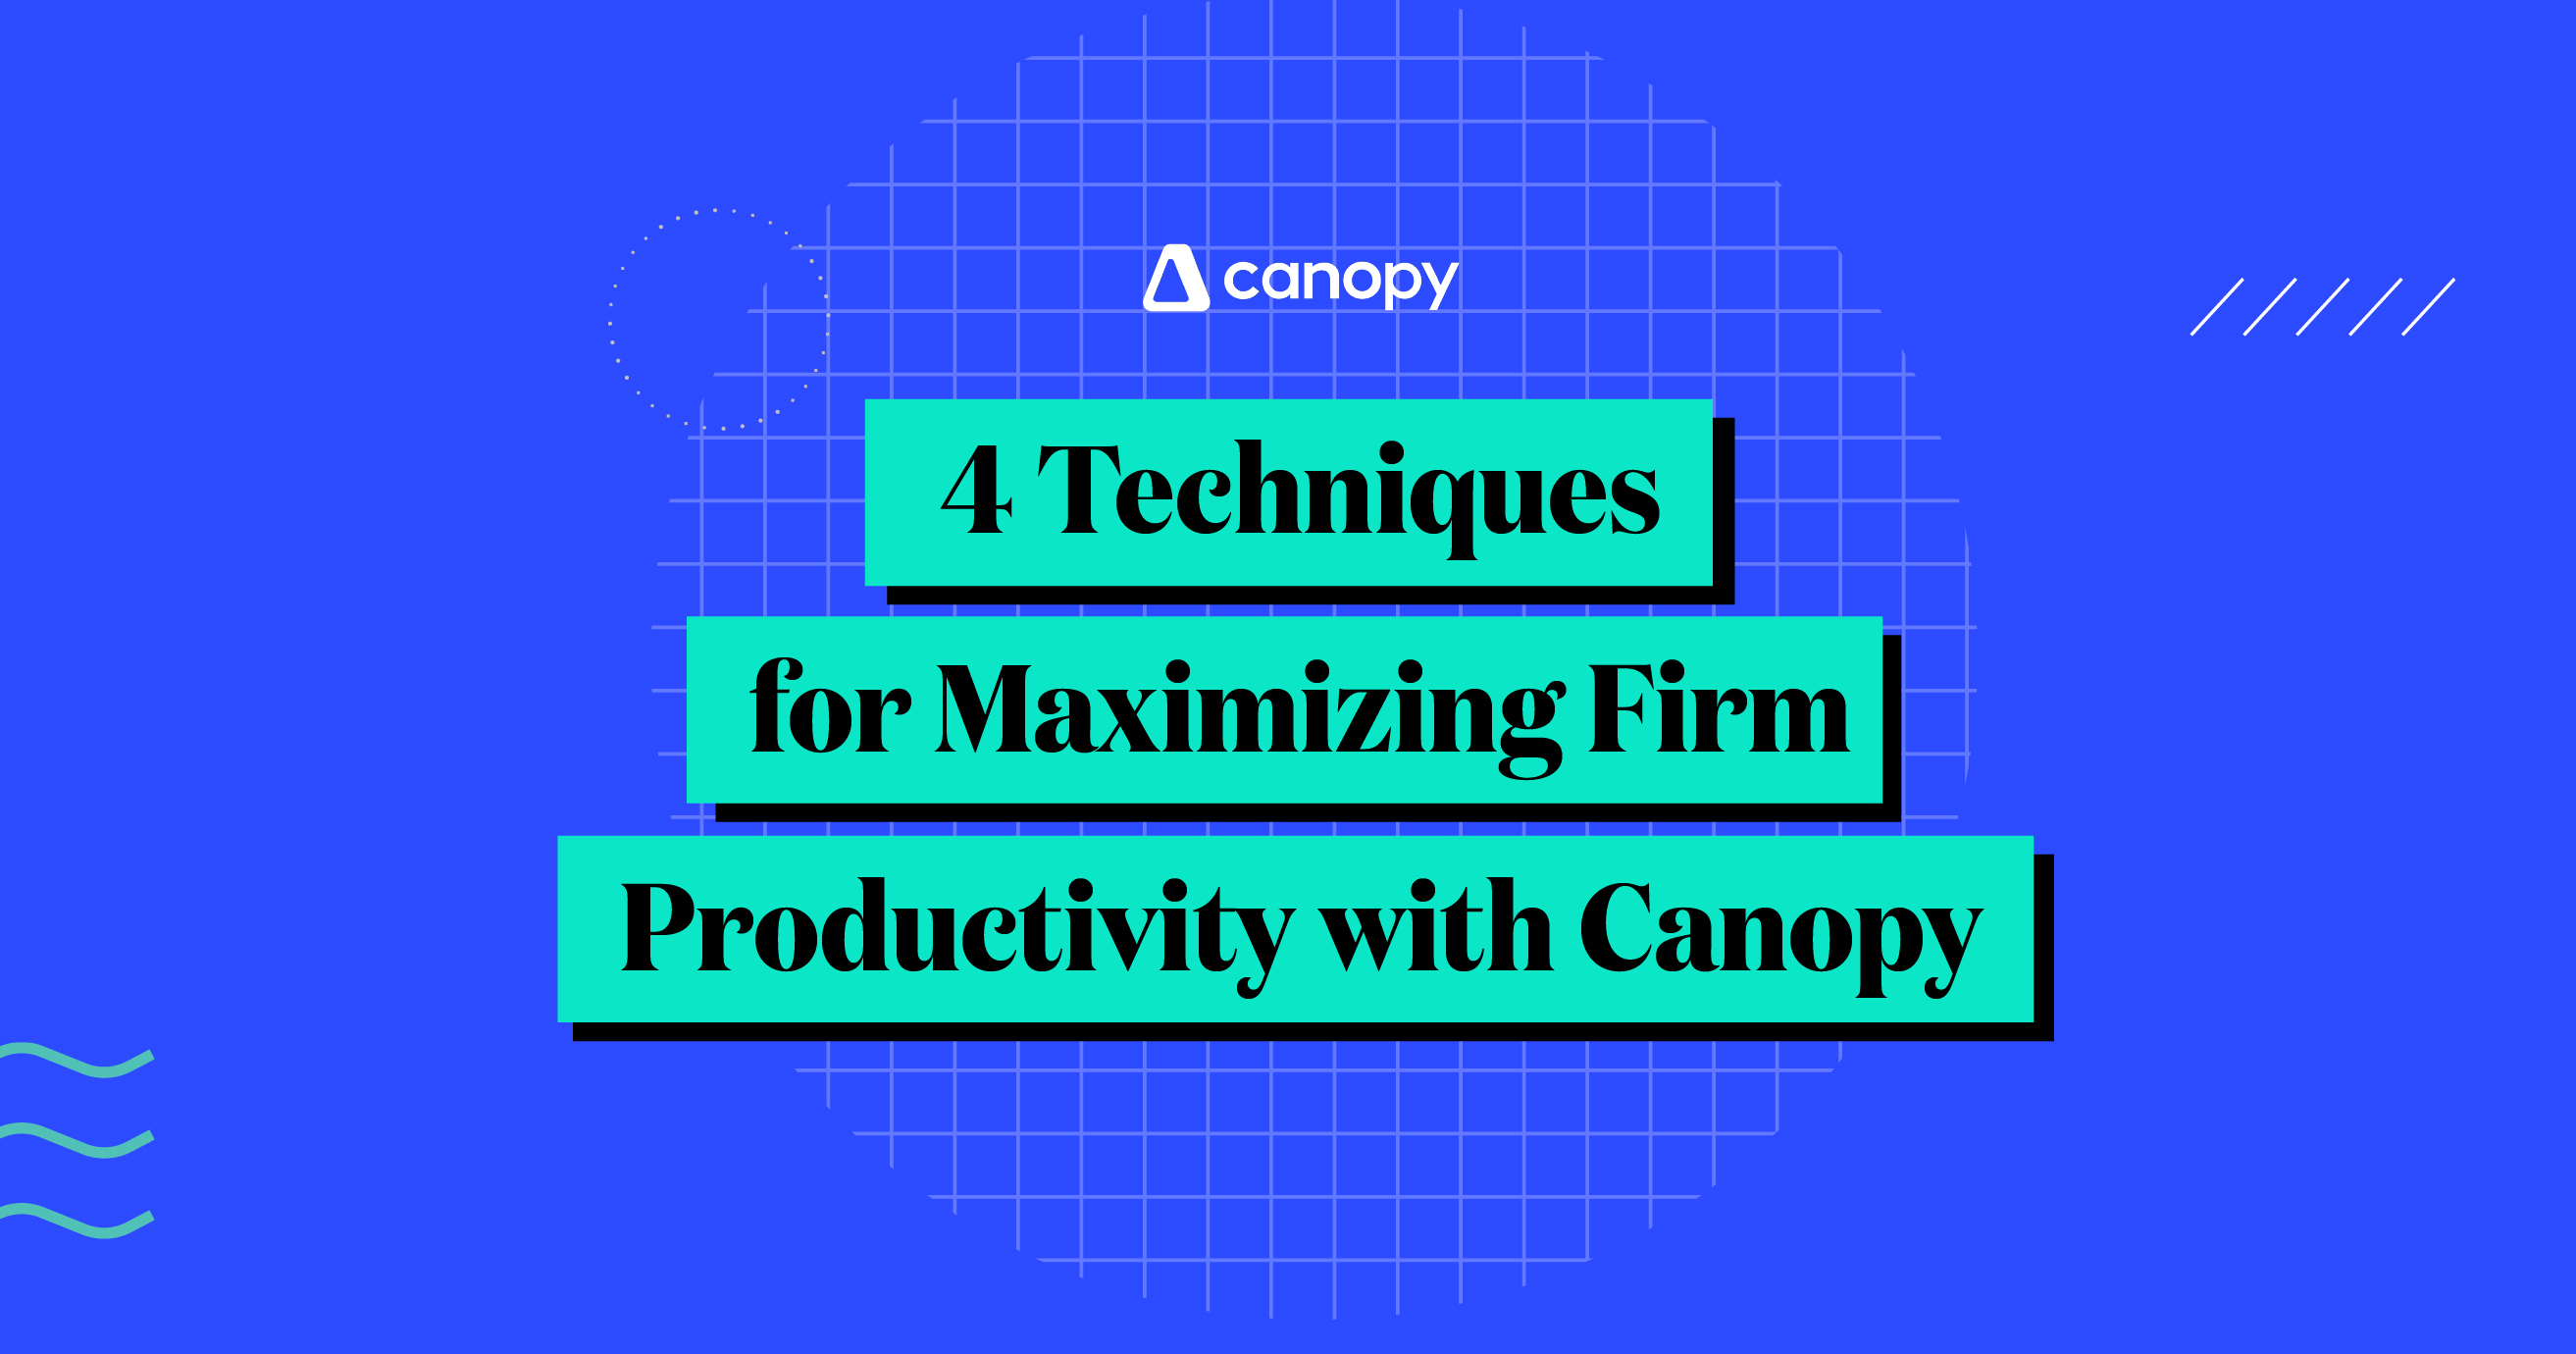 4 Techniques for Maximizing Firm Productivity with Canopy